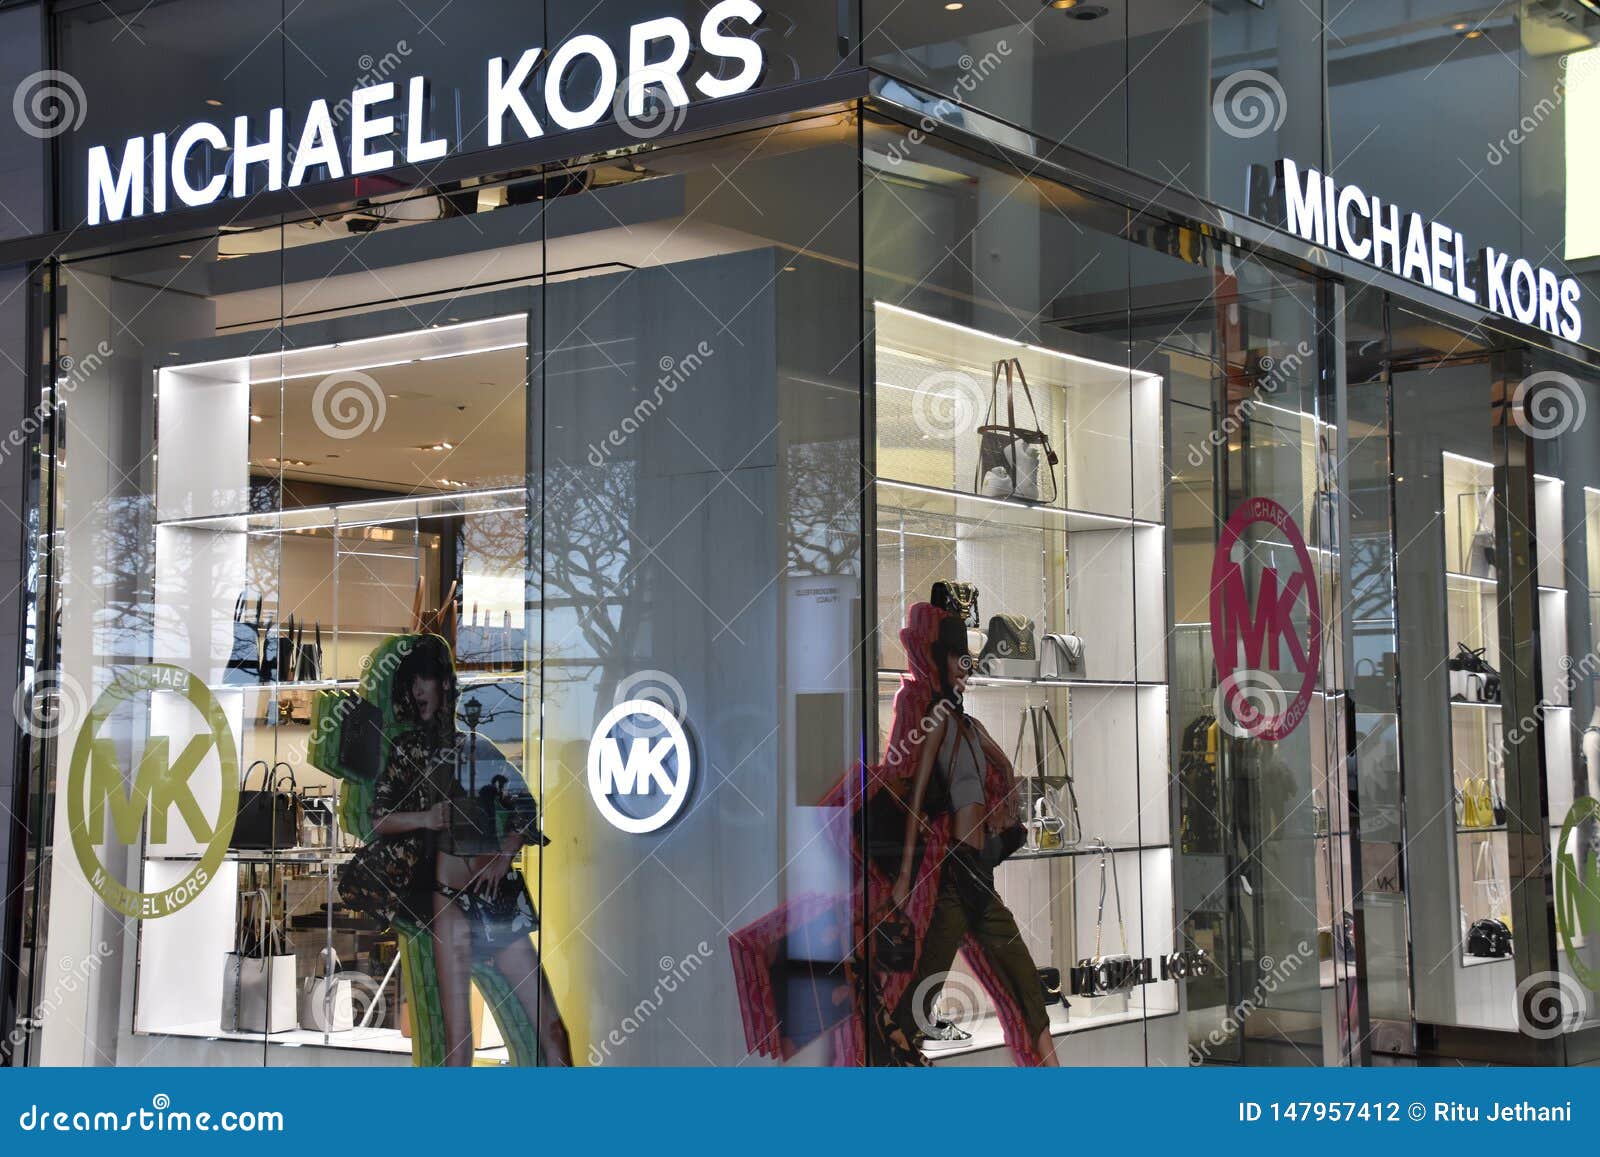 outlet store michael kors new york